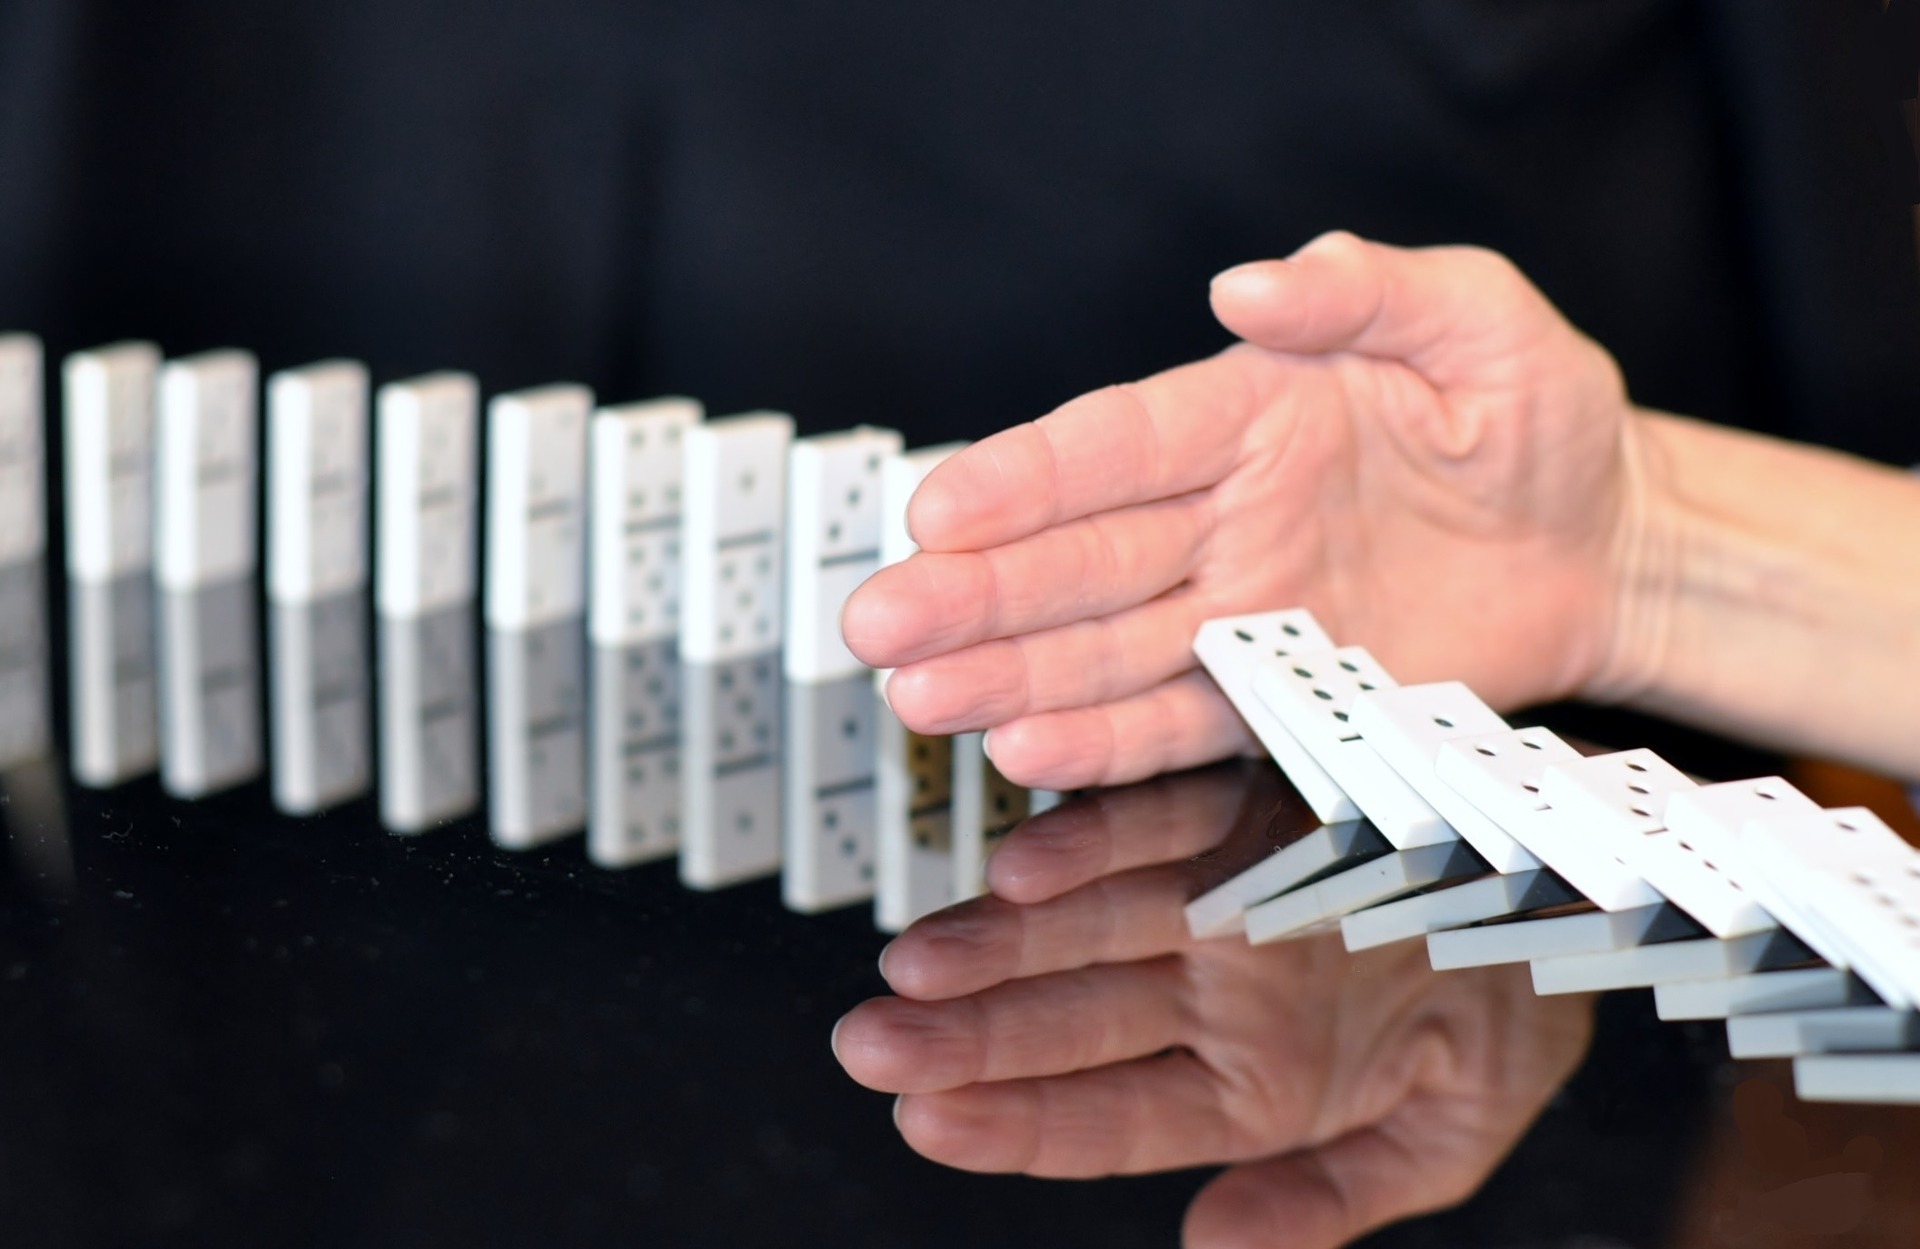 Hand stopping dominoes from falling